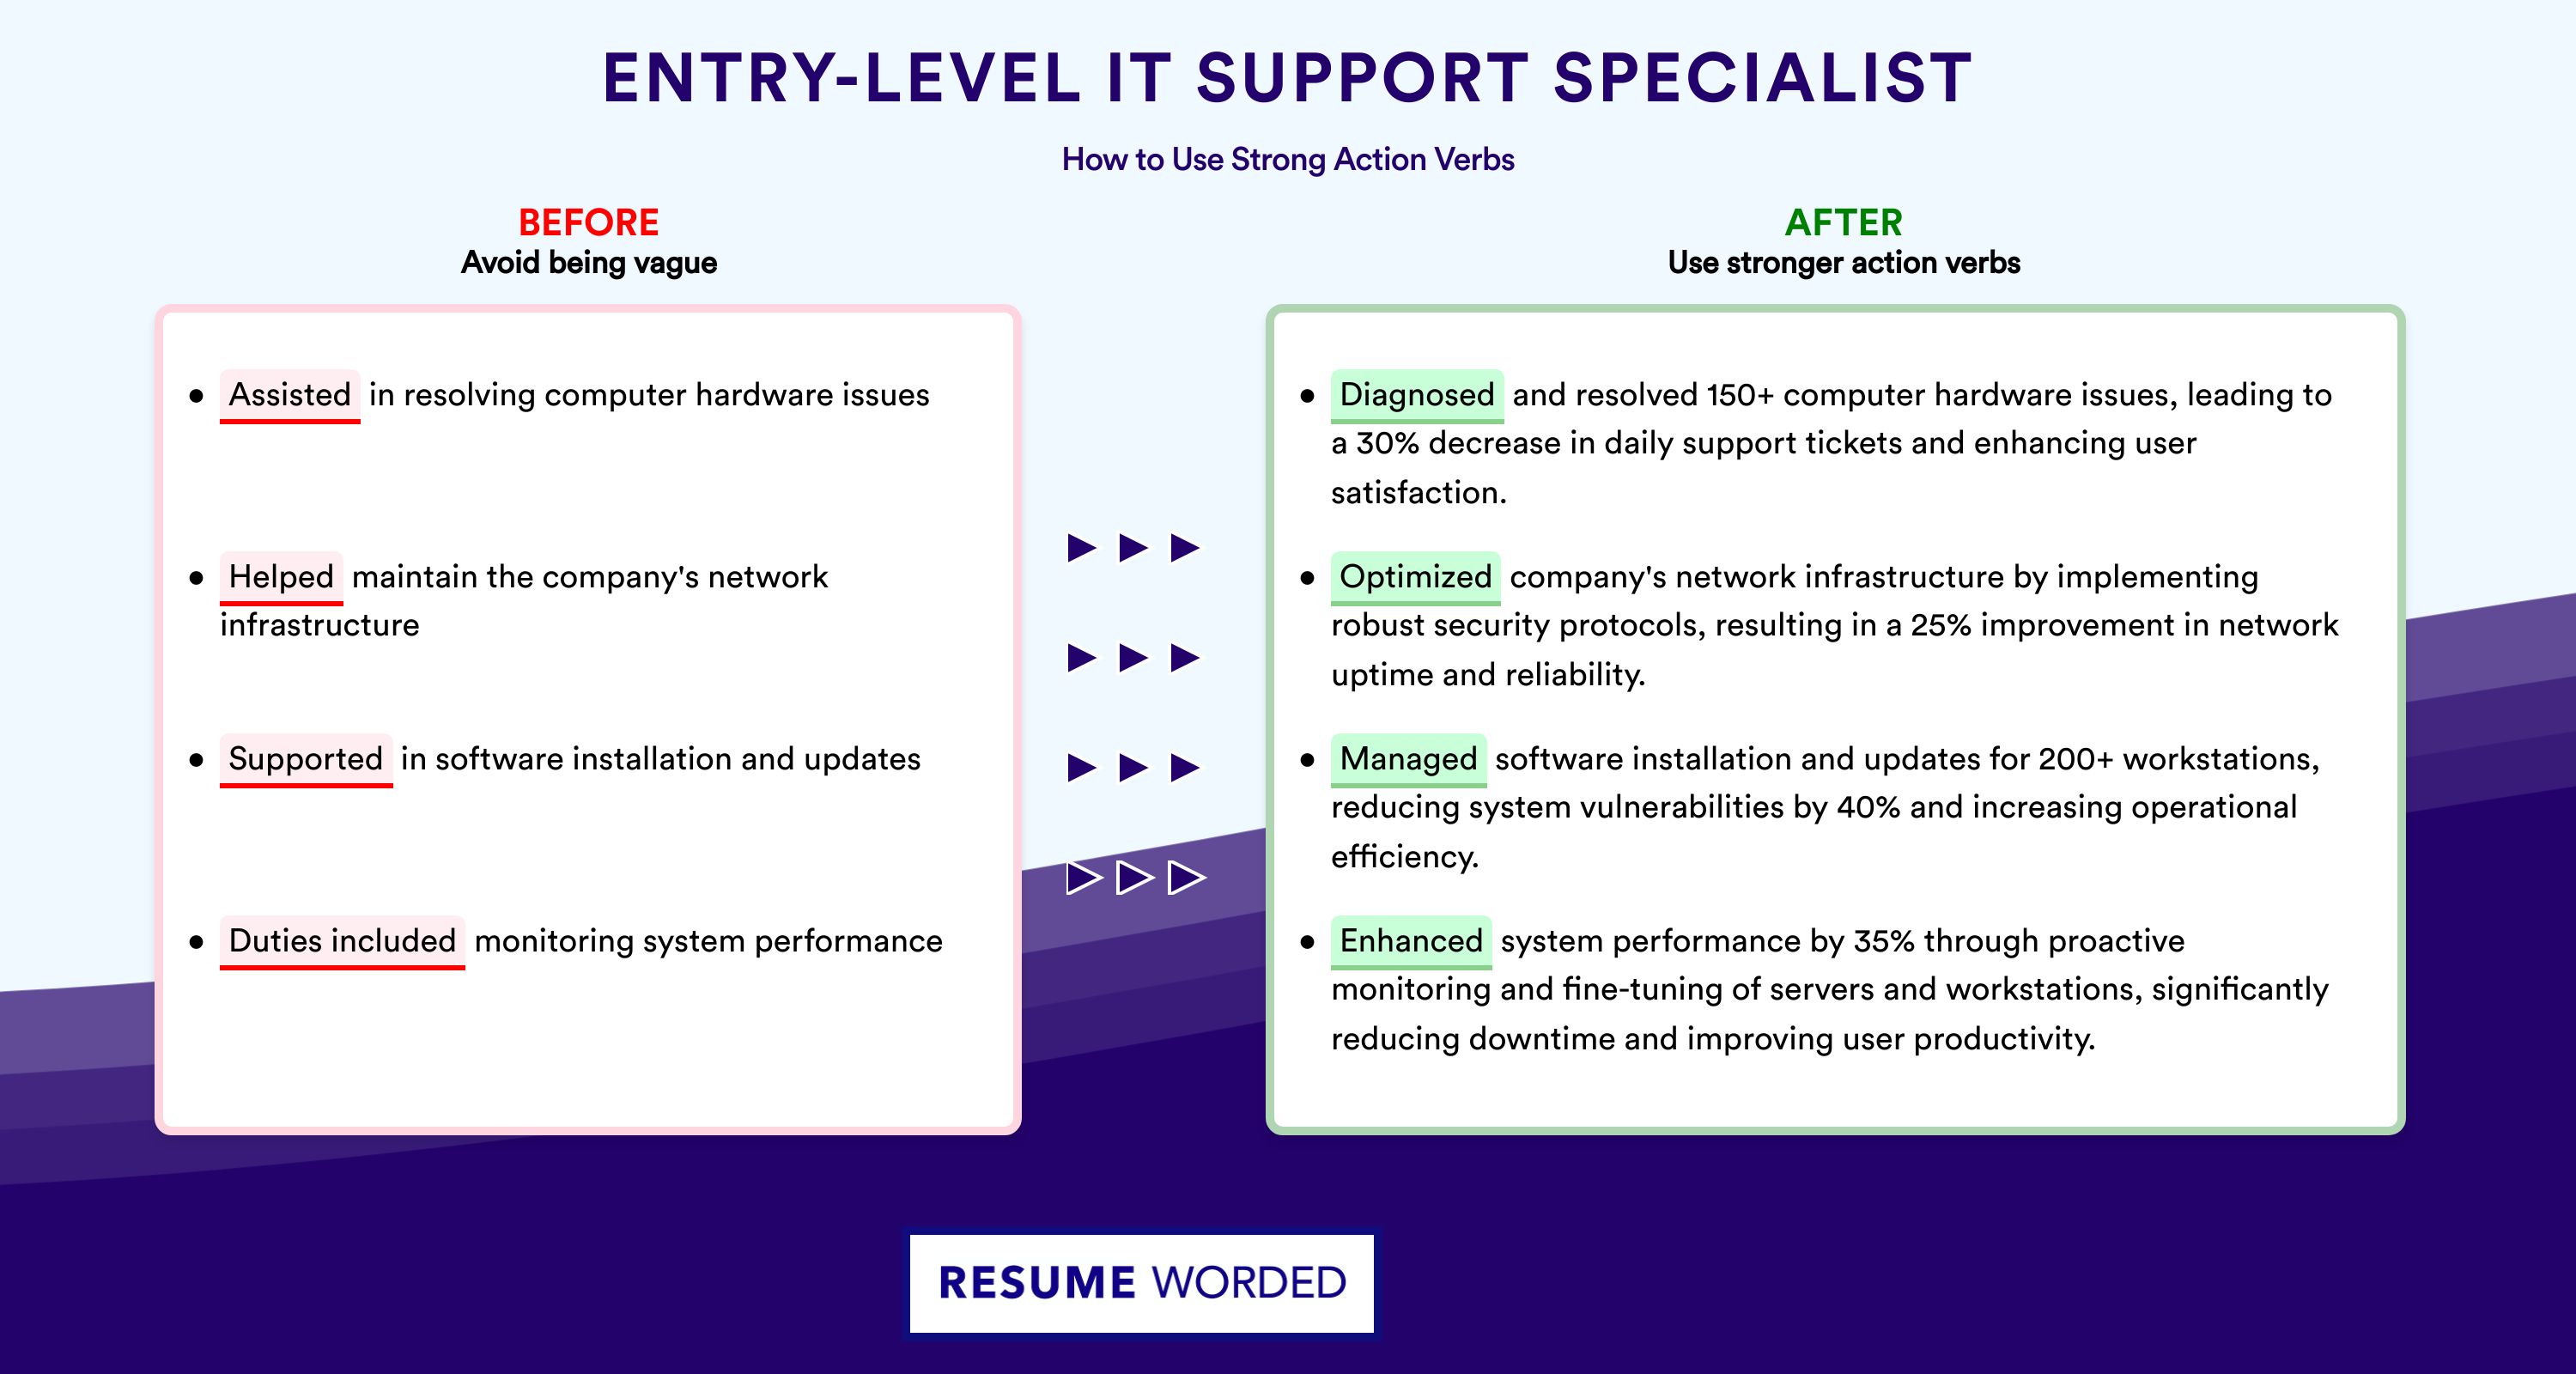 Action Verbs for Entry-Level IT Support Specialist